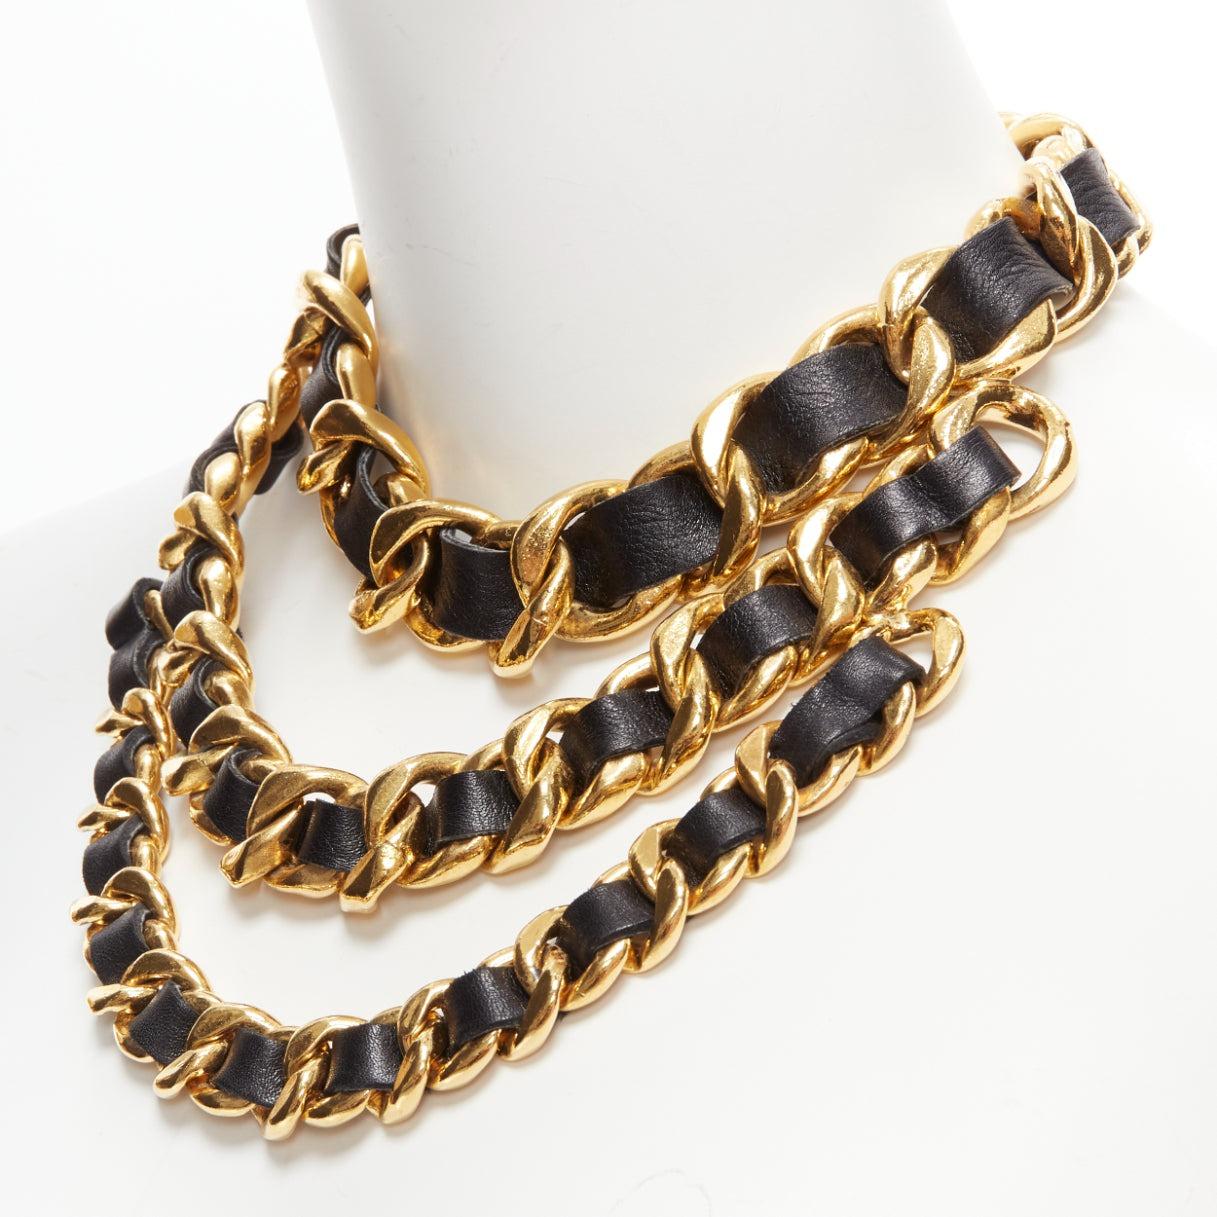 Rare CHANEL Collection 26 Vintage gold black triple chain choker Kim Kardashian
Reference: TGAS/D00751
Brand: Chanel
Designer: Karl Lagerfeld
Collection: Collection 26 1990's
Material: Metal, Leather
Color: Black, Gold
Pattern: Solid
Closure: Hook &